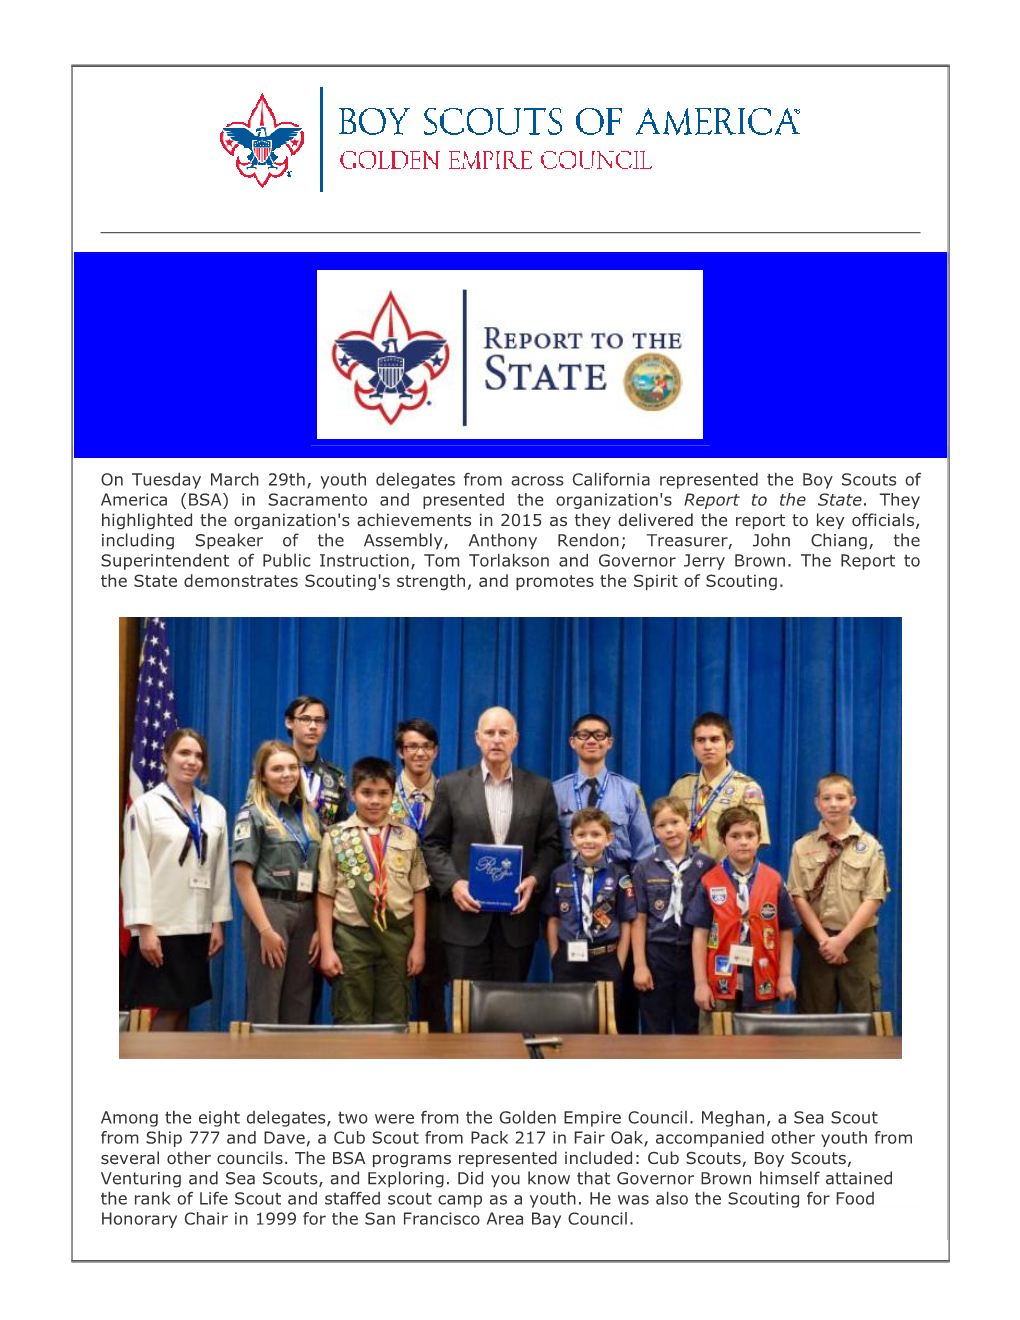 BSA) in Sacramento and Presented the Organization's Report to the State